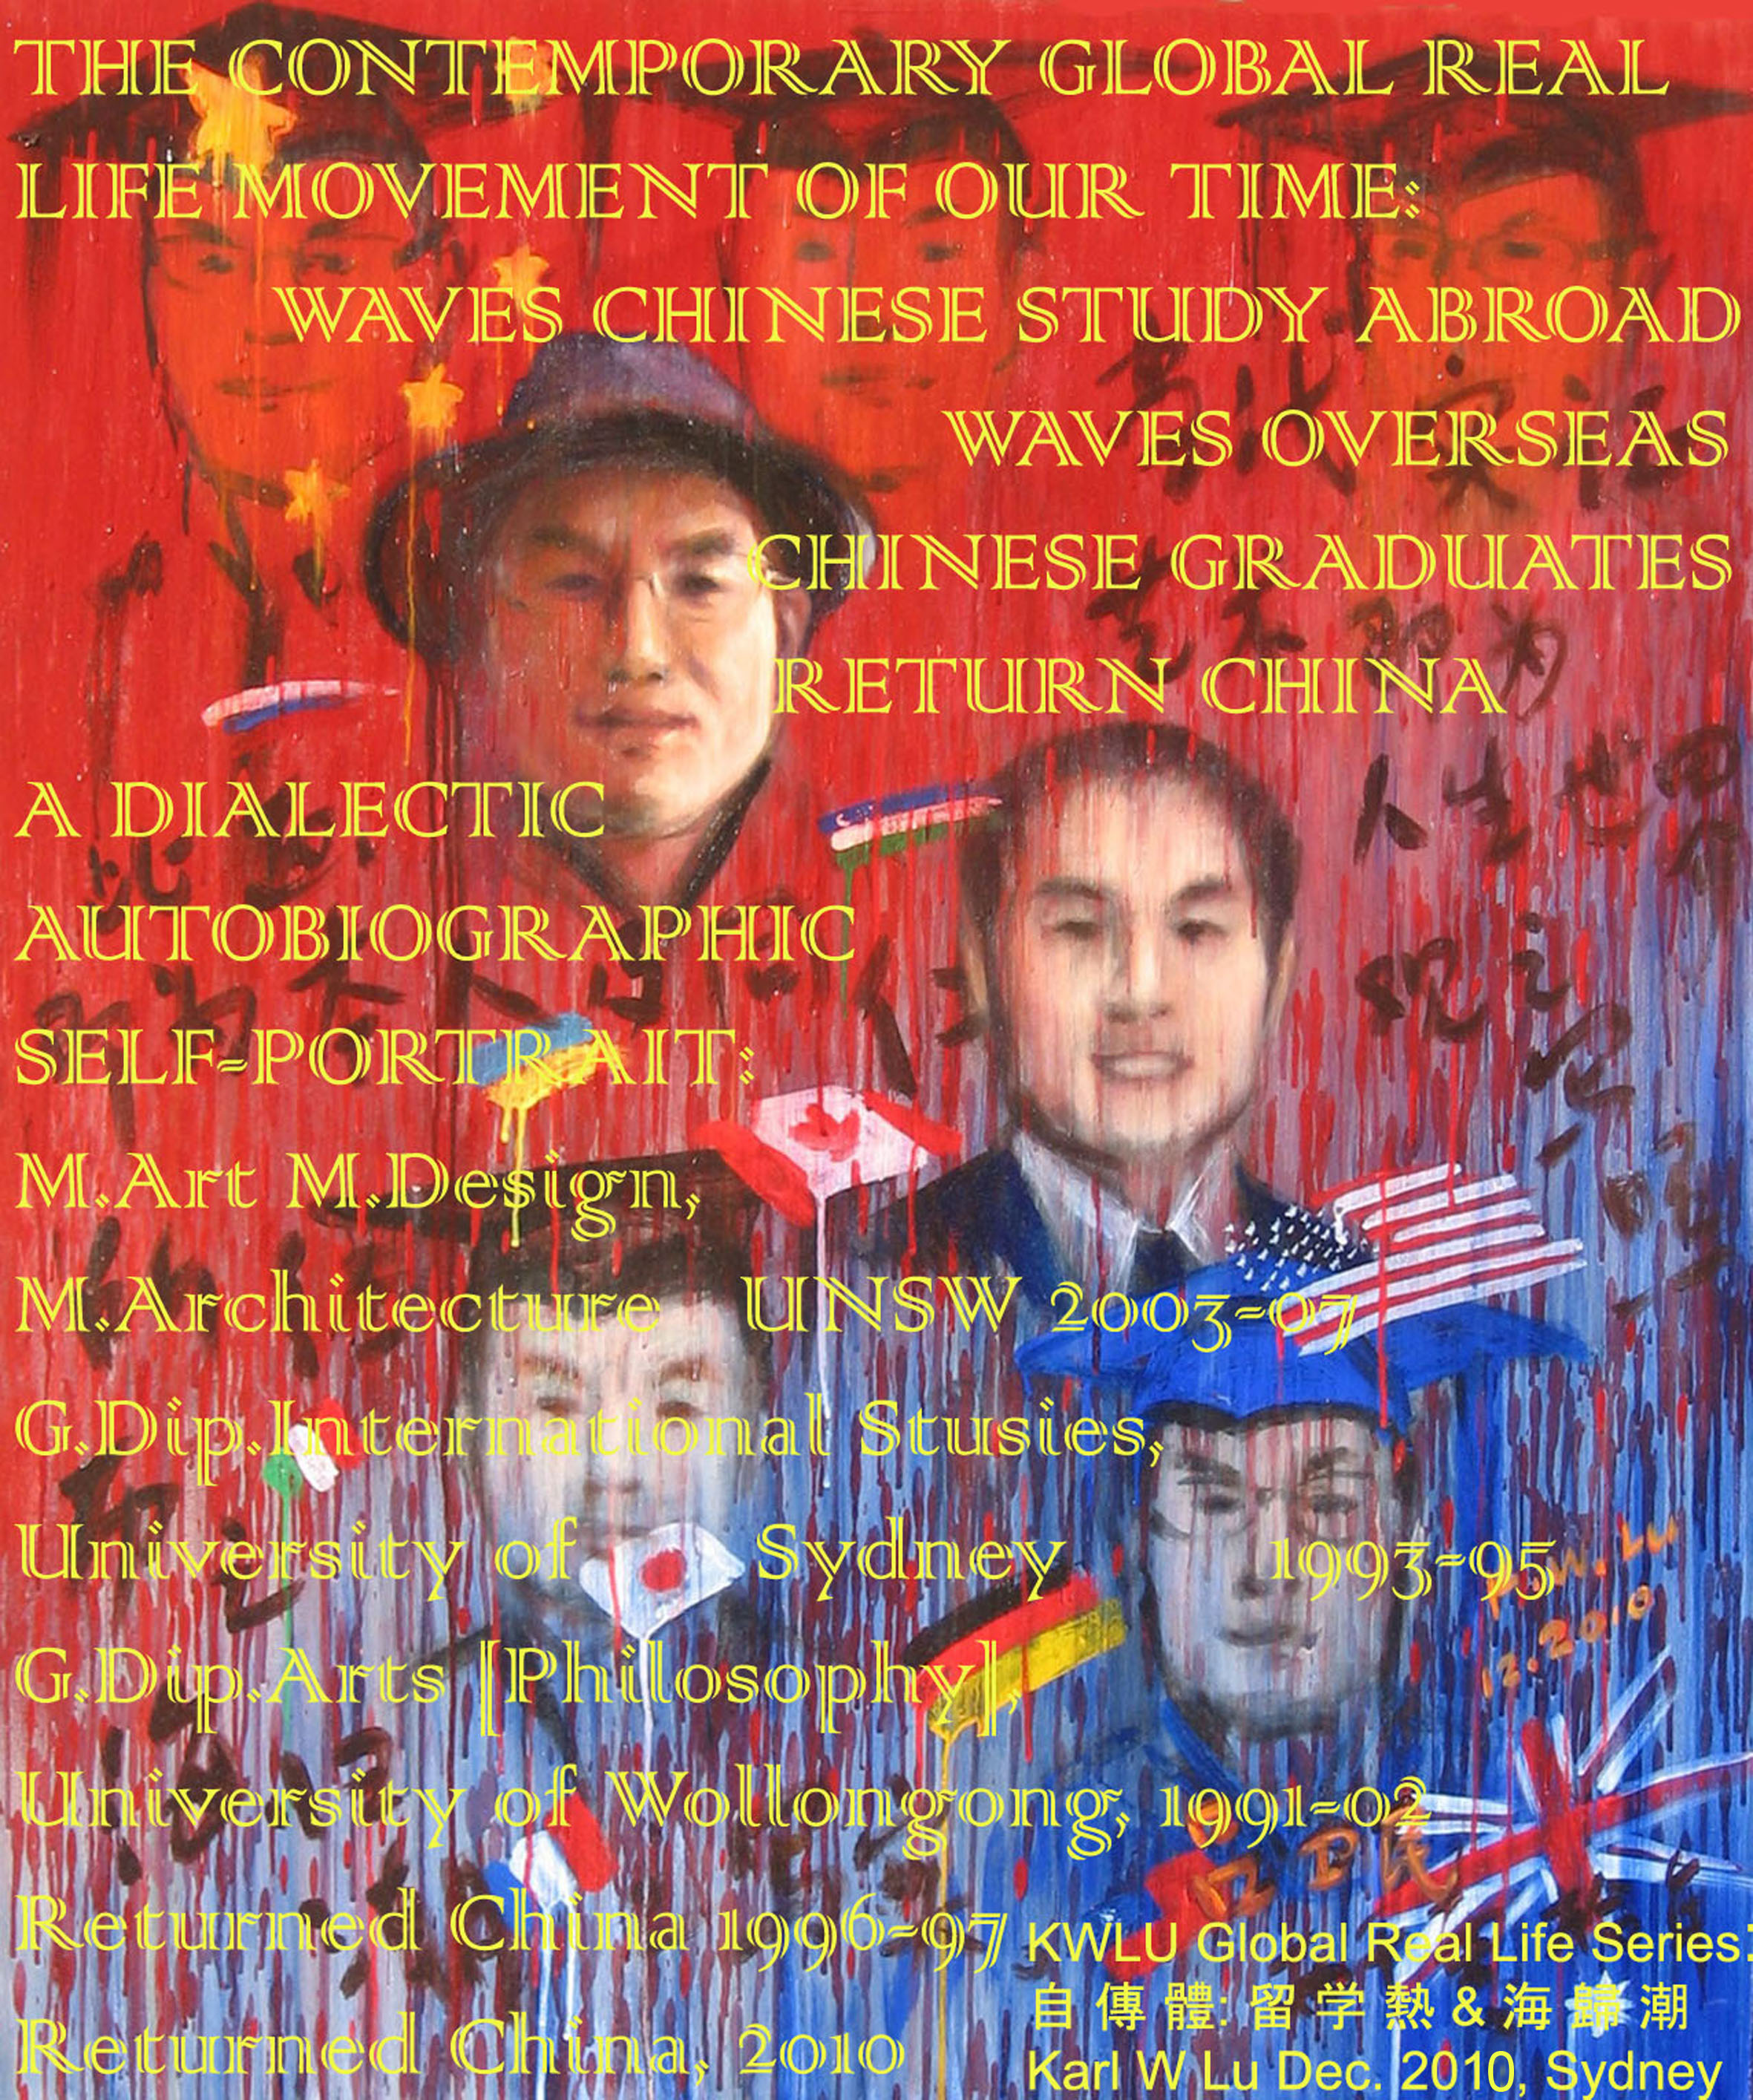  Dialectic Self-Portrait with 5 Postgraduate Degrees &amp; Dips (Positive Global Life Series 2008 -2010) 